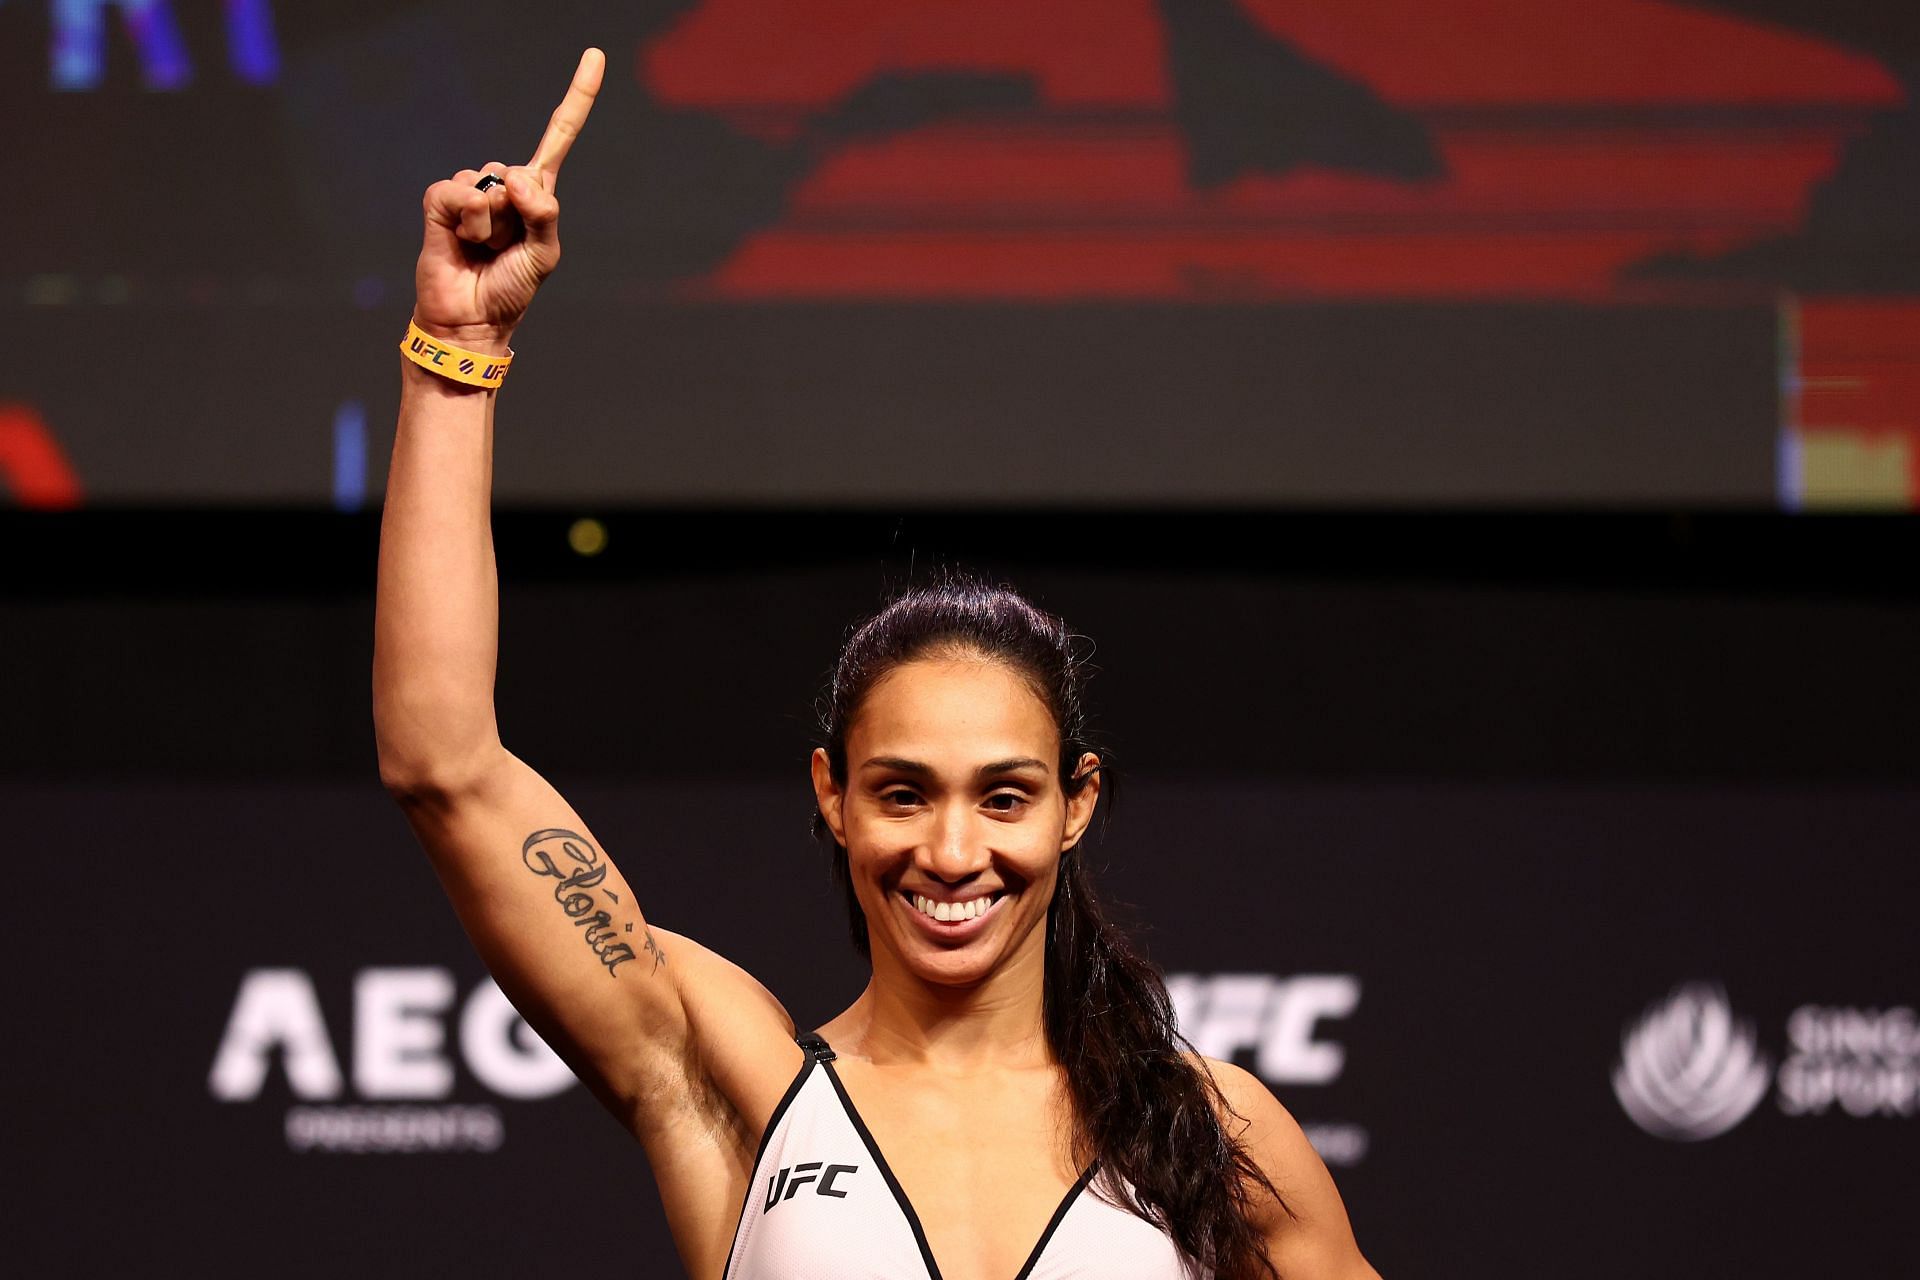 Taila Santos during the weigh-ins for her title fight with Valentina Shevchenko